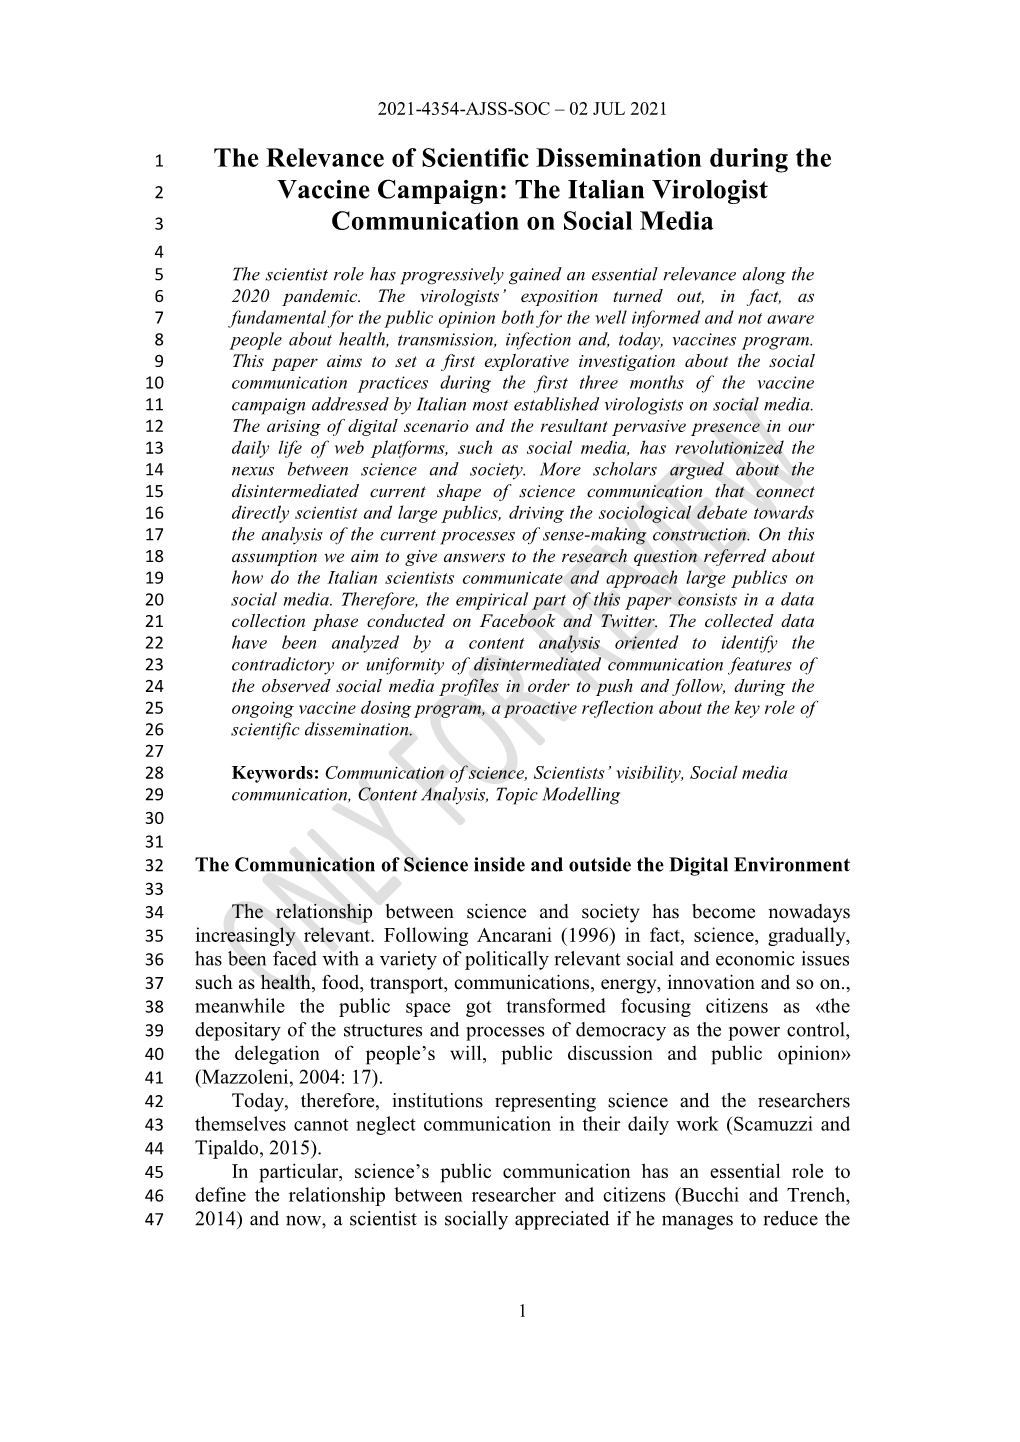 The Relevance of Scientific Dissemination During the Vaccine Campaign: the Italian Virologist Communication on Social Media